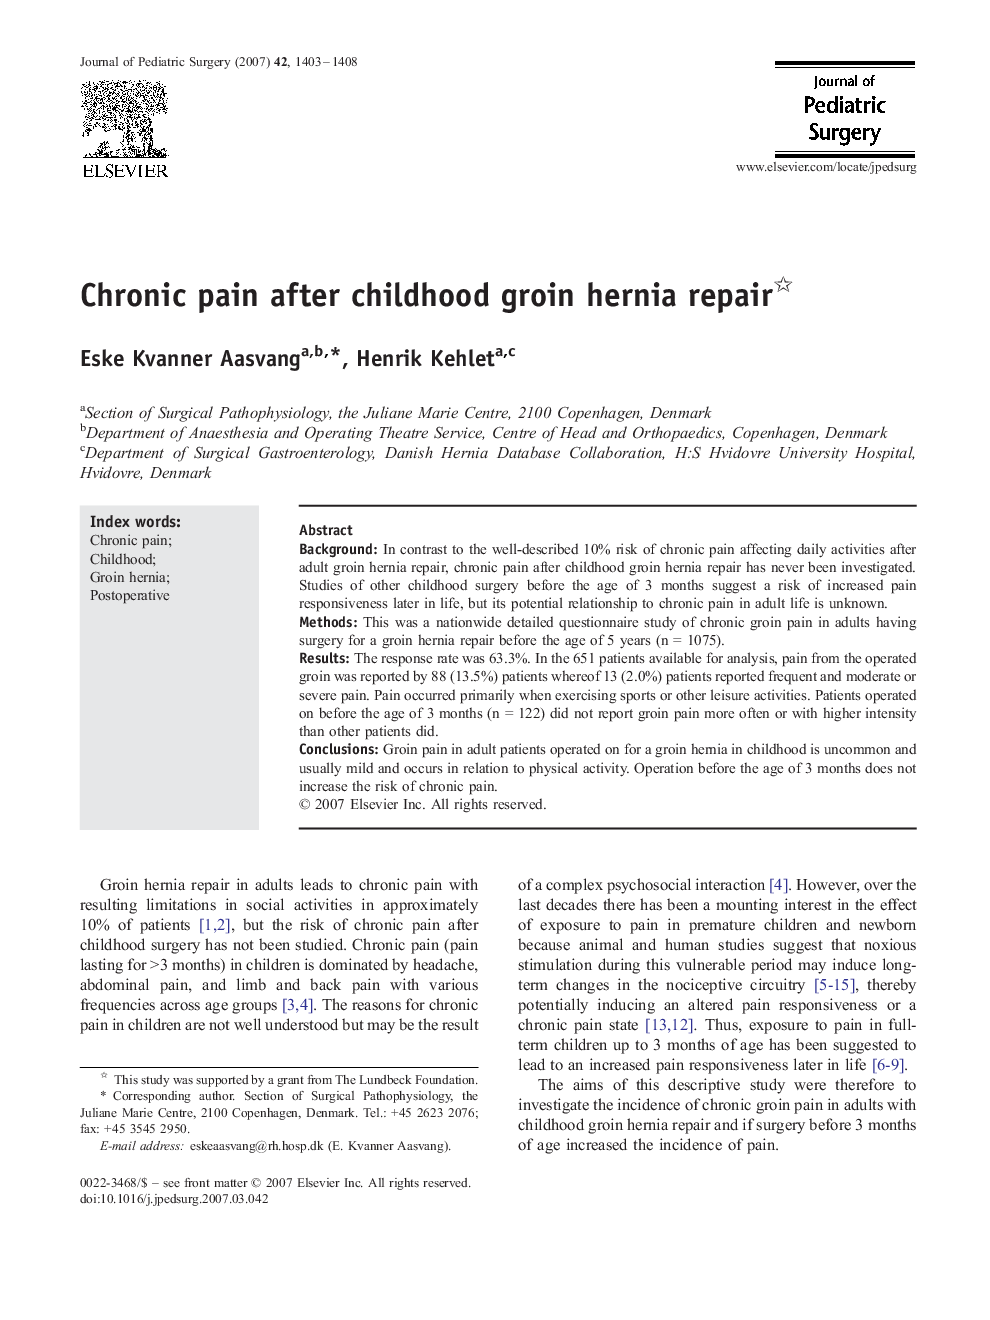 Chronic pain after childhood groin hernia repair 